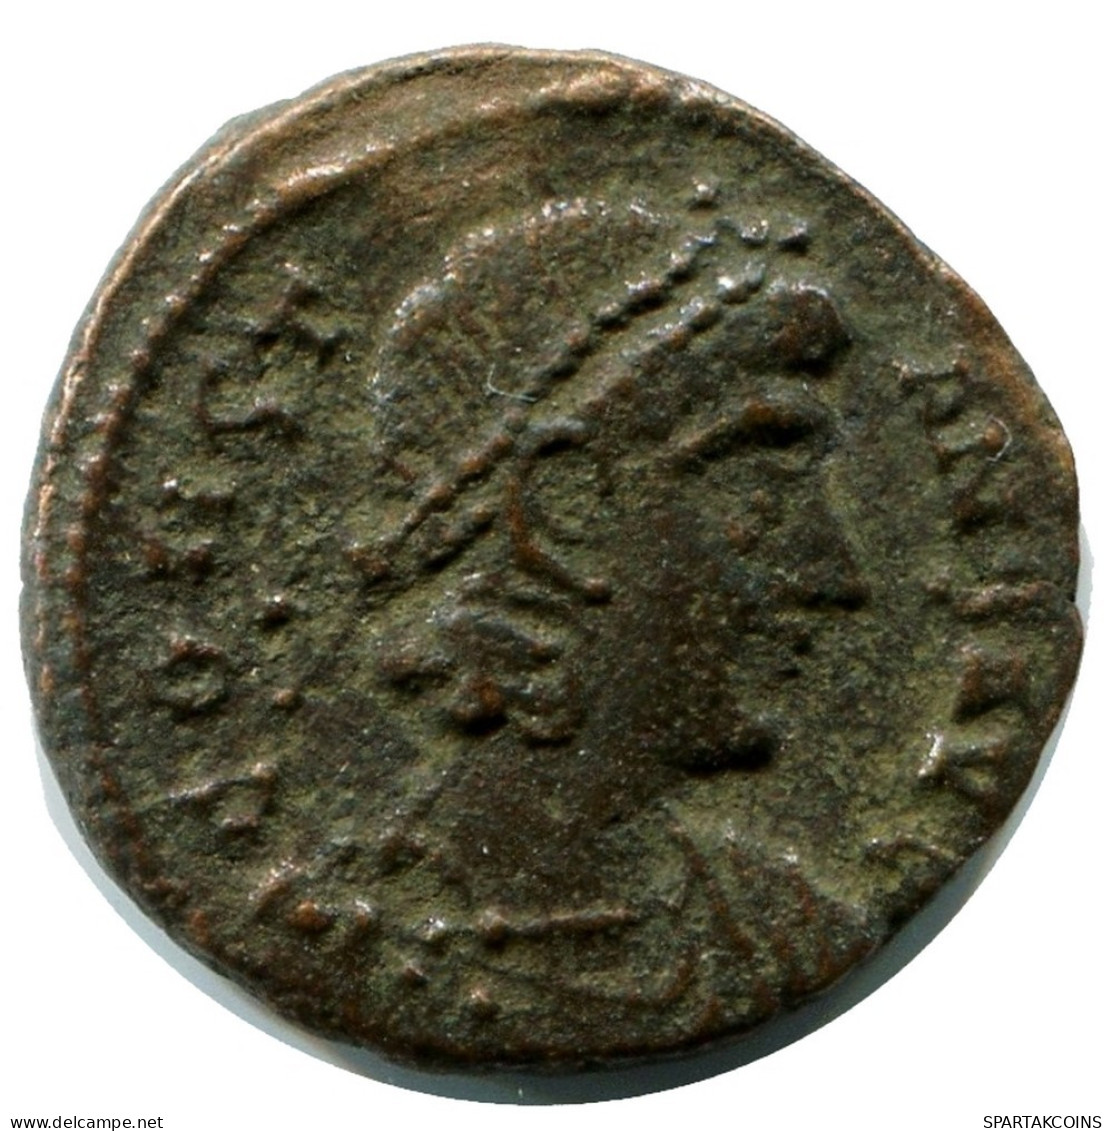 CONSTANS MINTED IN ALEKSANDRIA FOUND IN IHNASYAH HOARD EGYPT #ANC11364.14.D.A - The Christian Empire (307 AD Tot 363 AD)